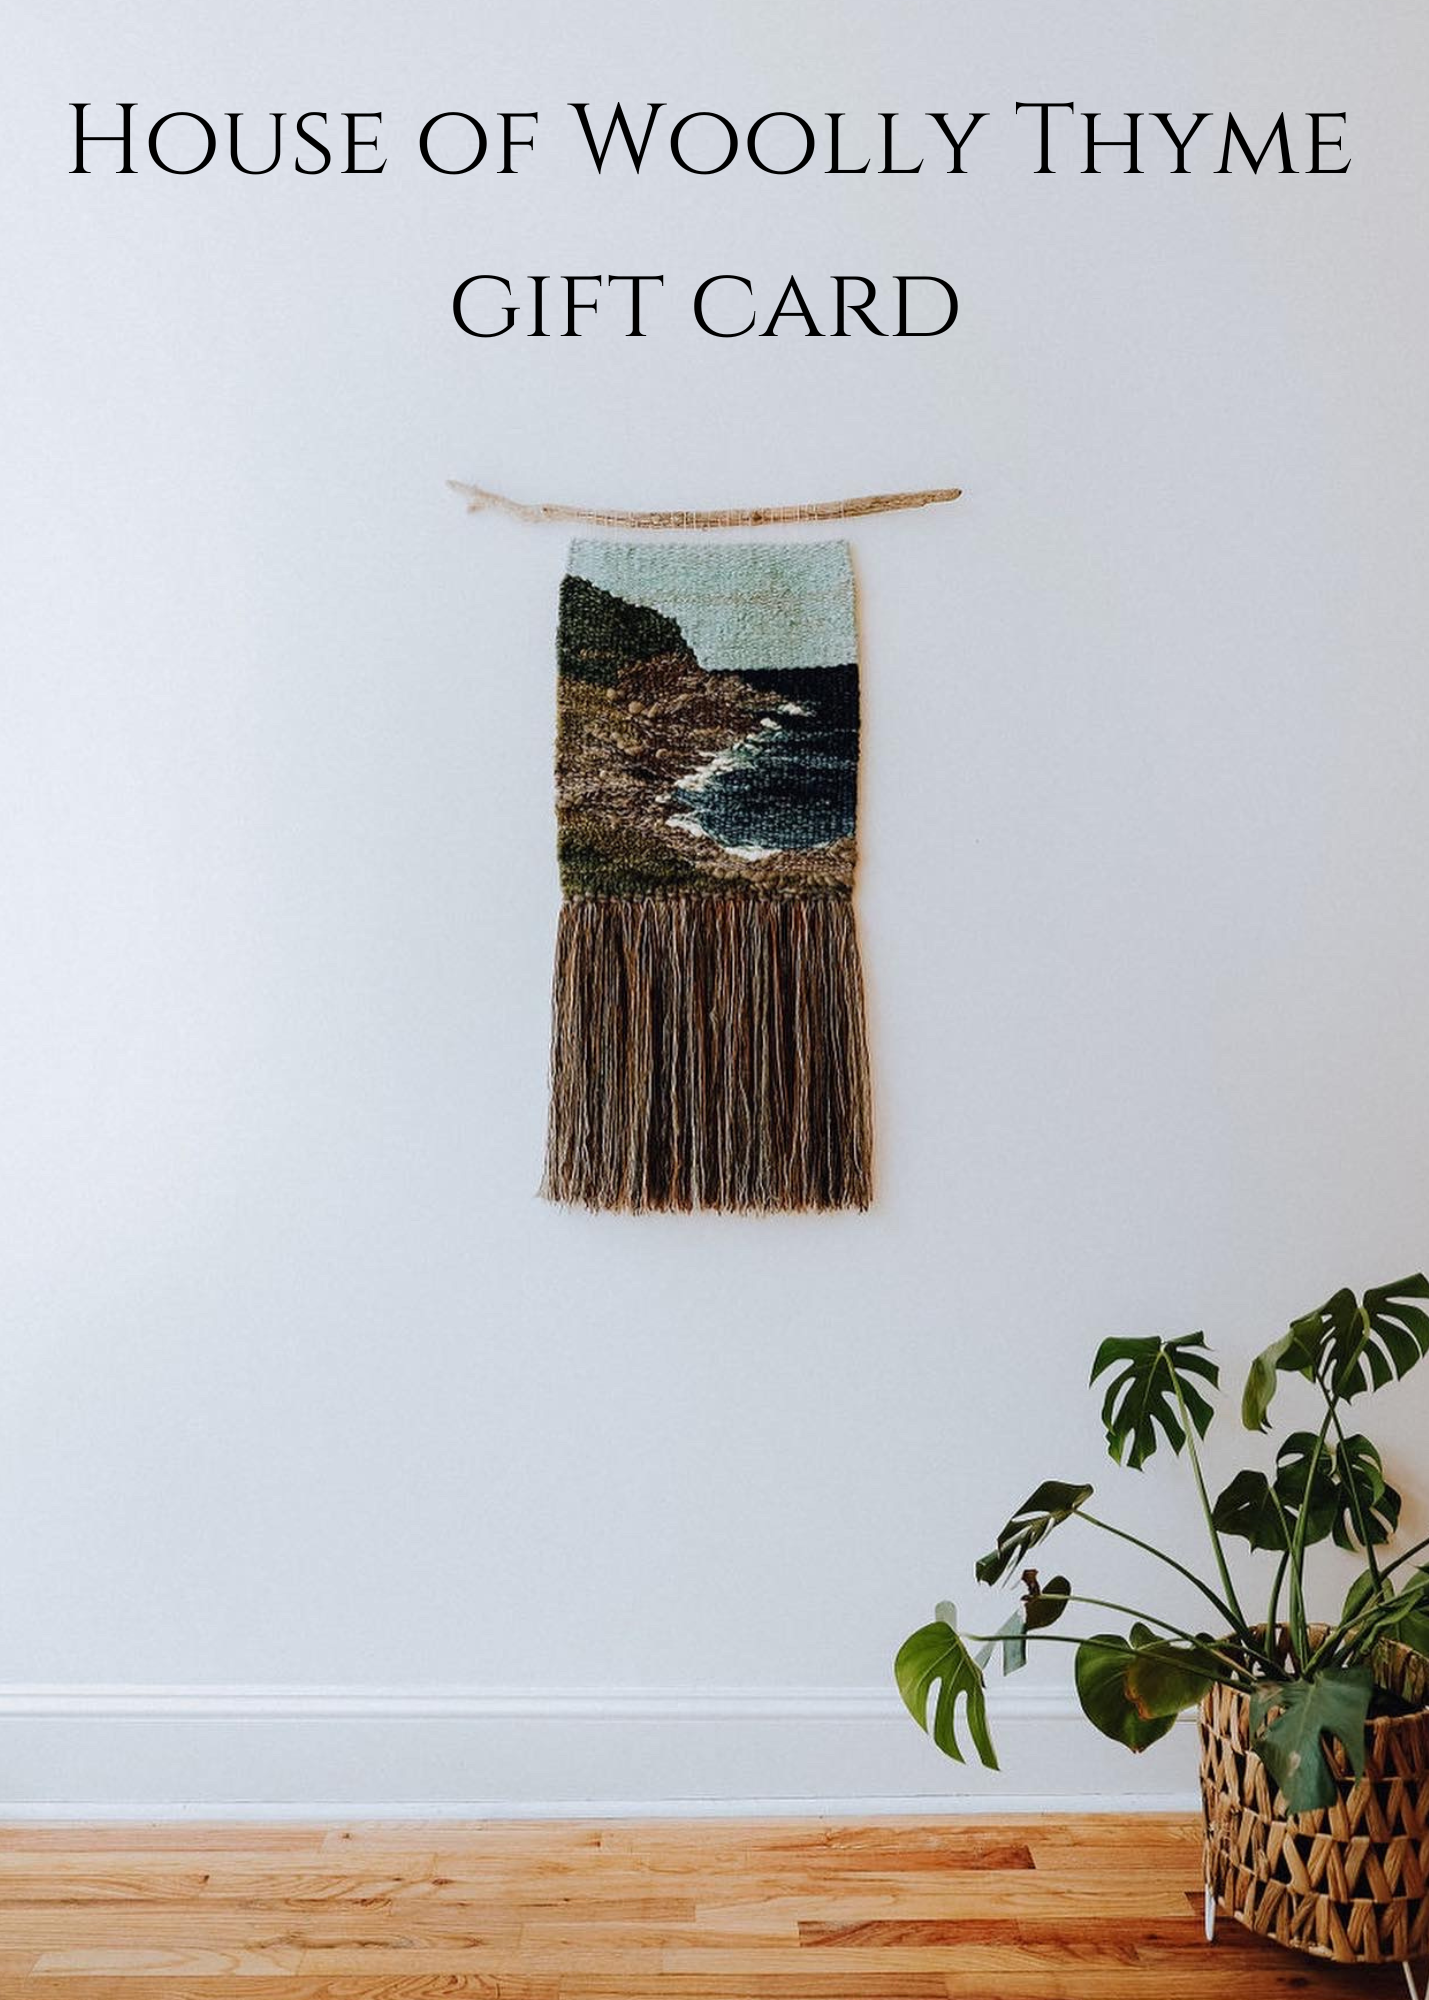 House of Woolly Thyme gift card